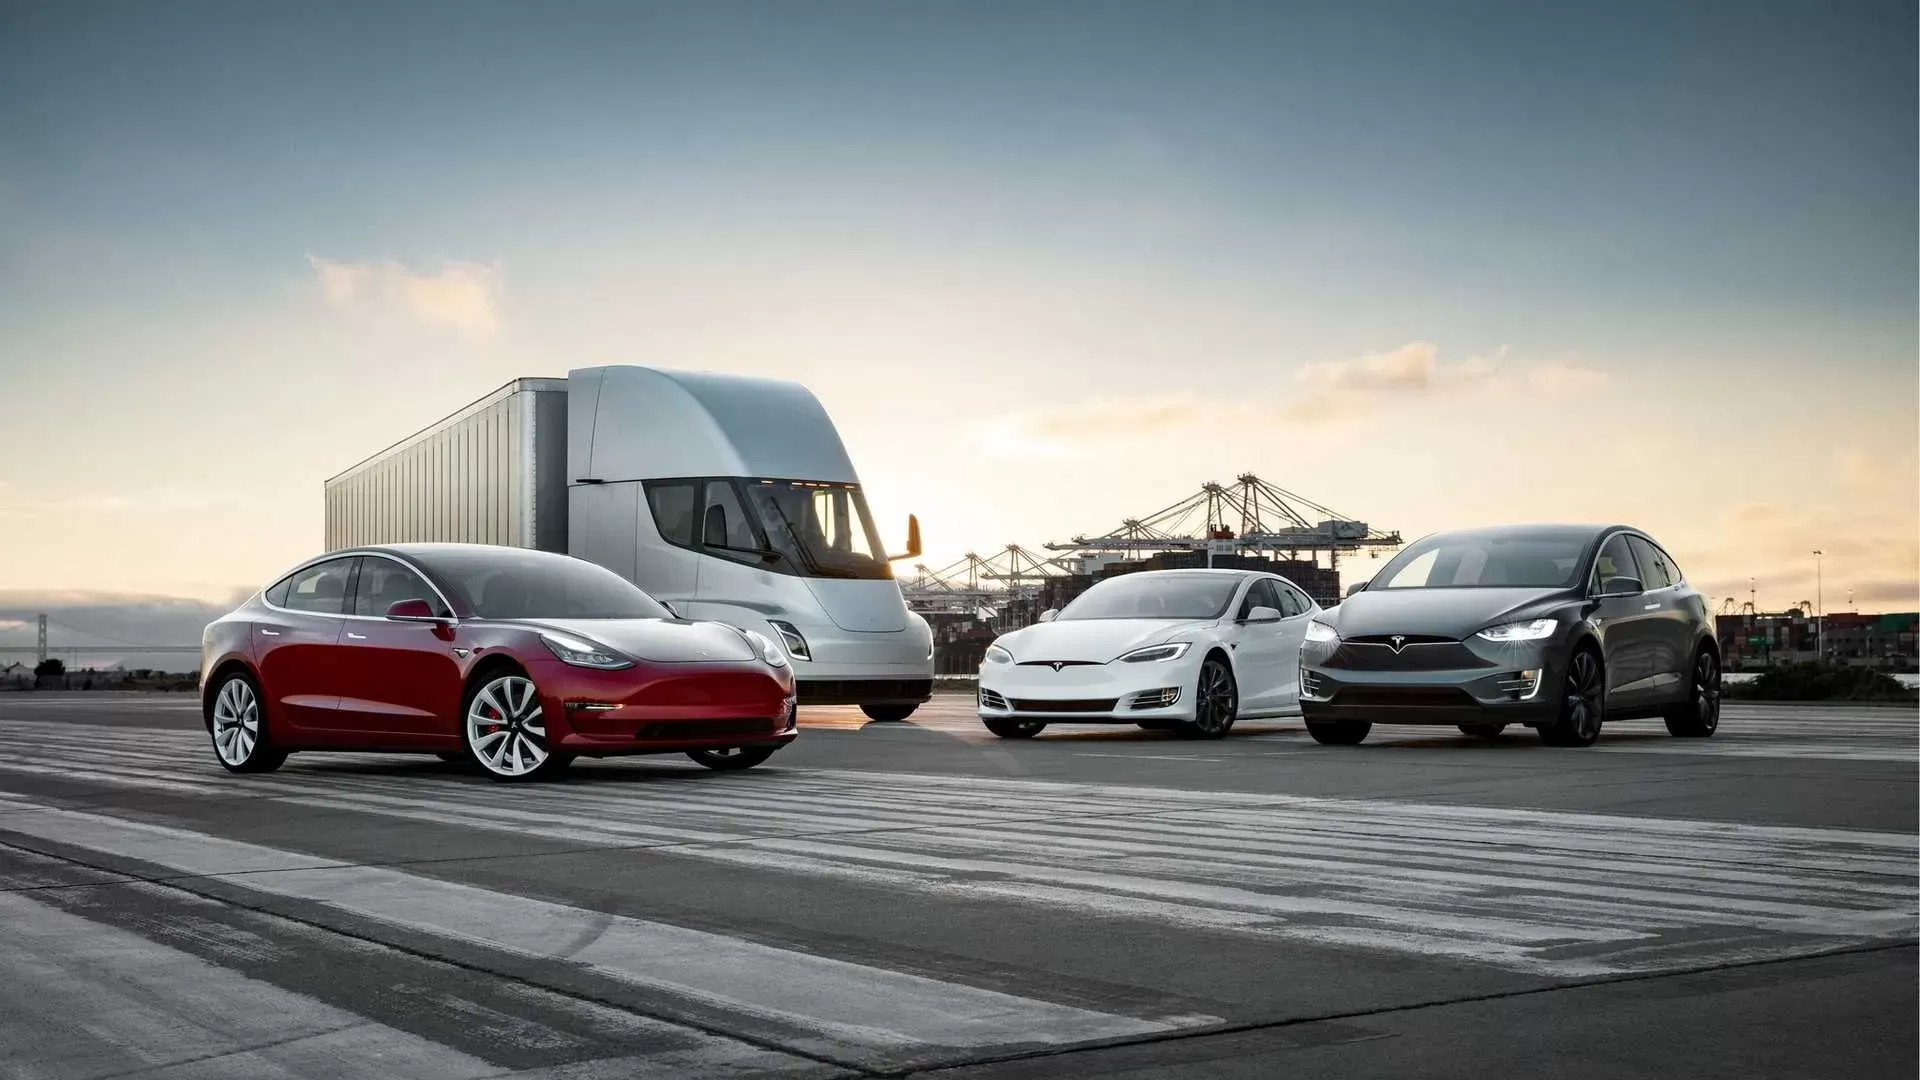 Travel retail norway places order for tesla semi